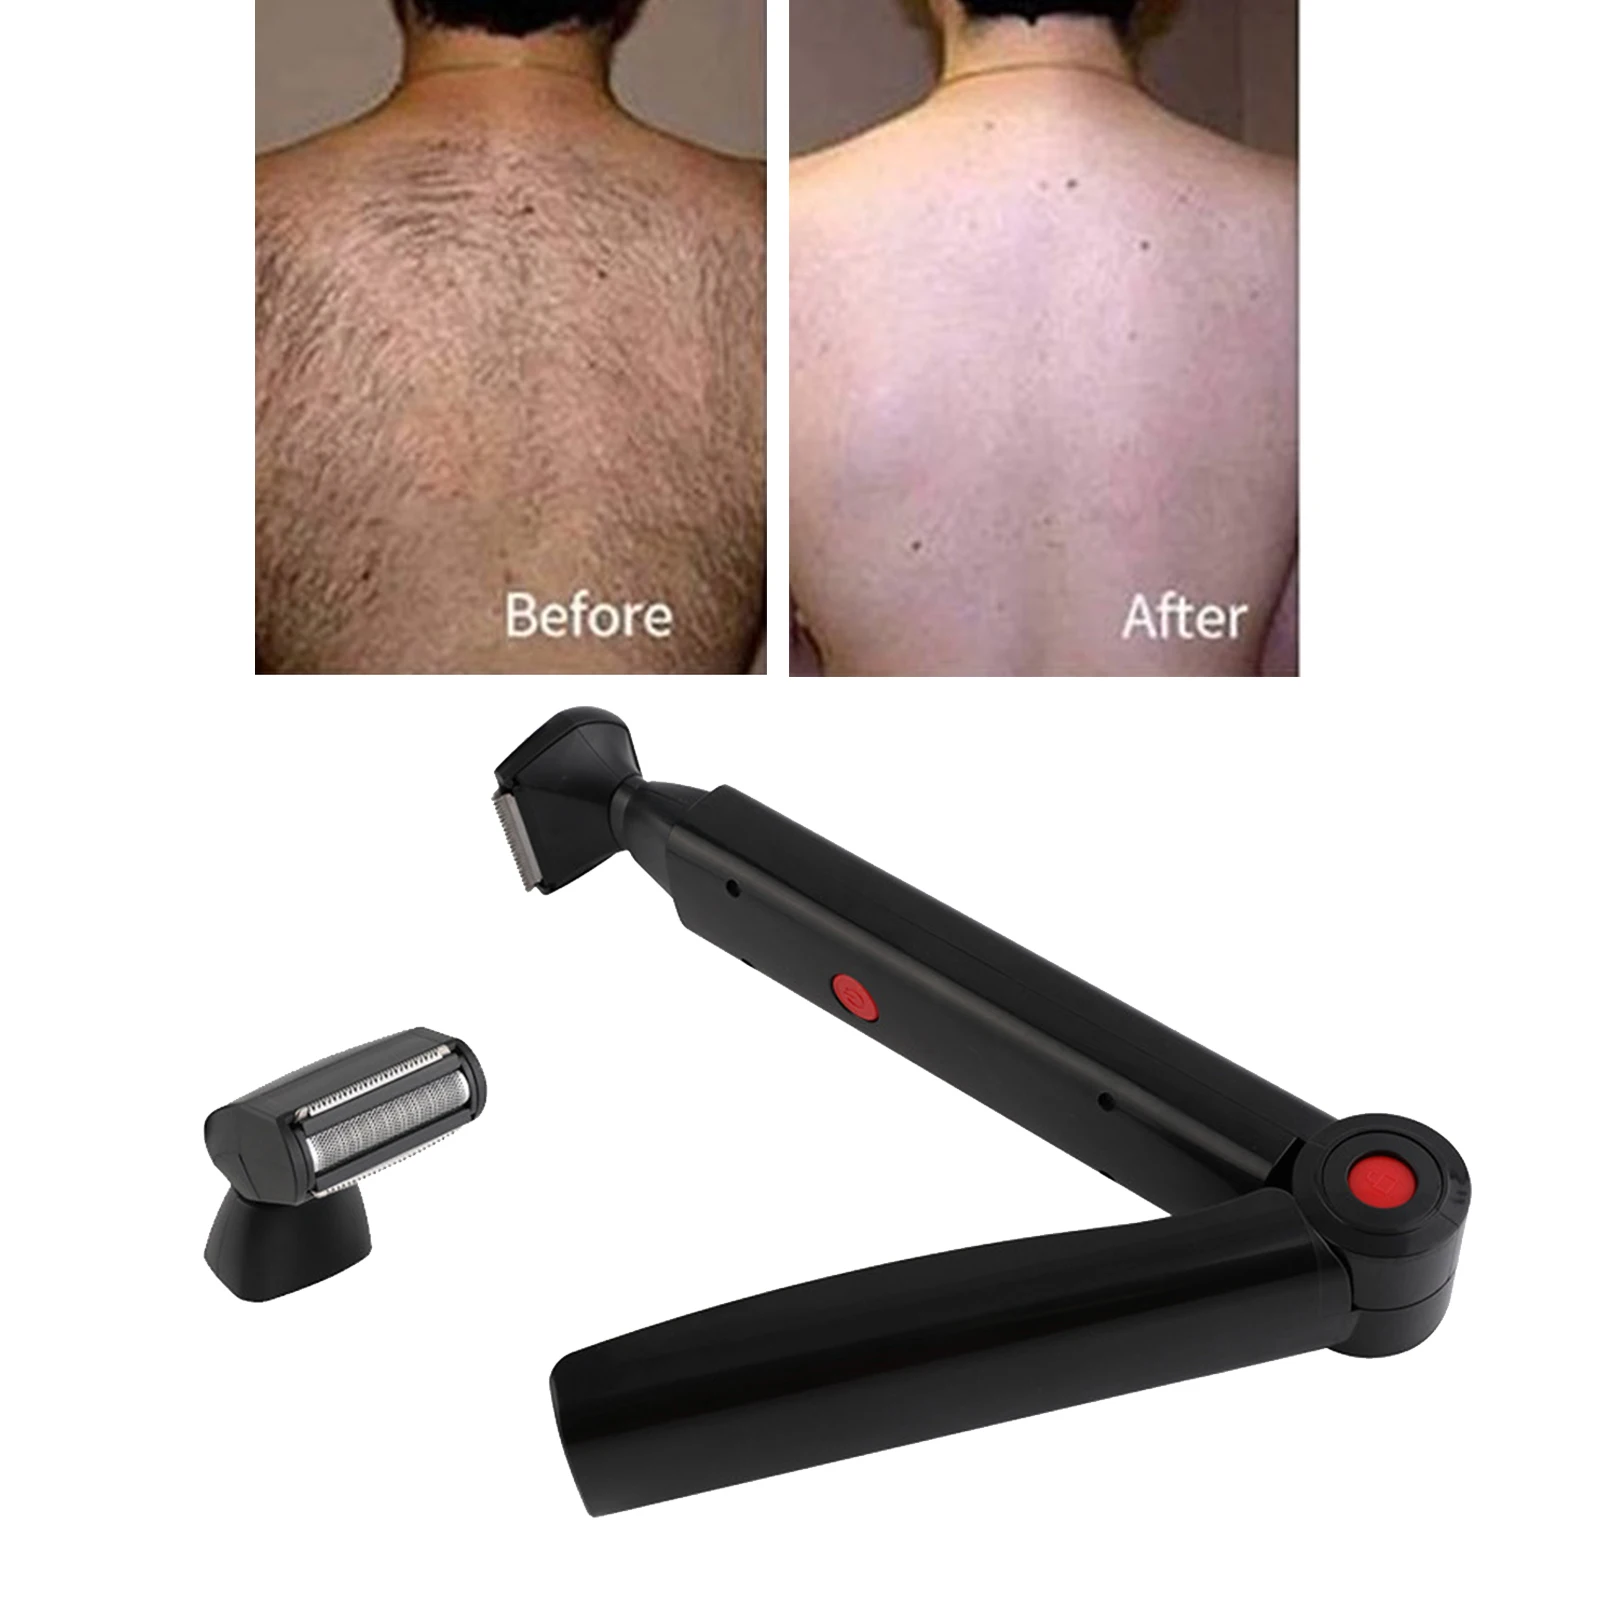 USB Rechargeable Long Handle Foldable Back Painless Hair Shaver Trimmer Hair Removal Groomer Beauty Body Shaving Tool